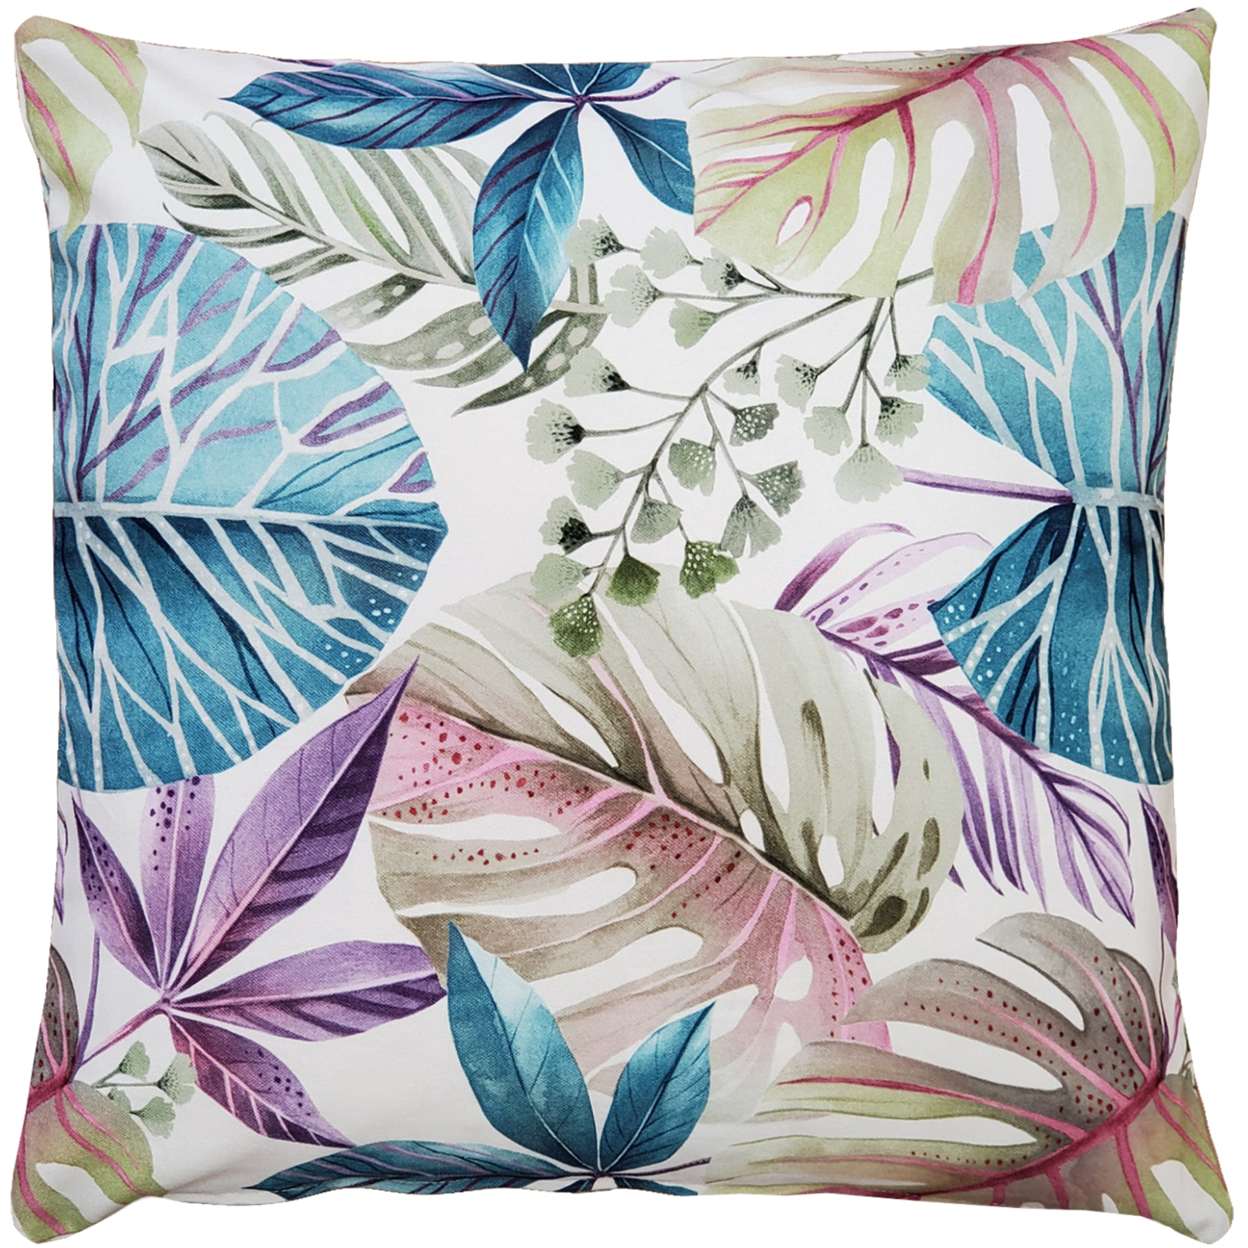 Thai Garden Blue Leaf Throw Pillow 20x20 Inches Square, Complete Pillow With Polyfill Pillow Insert